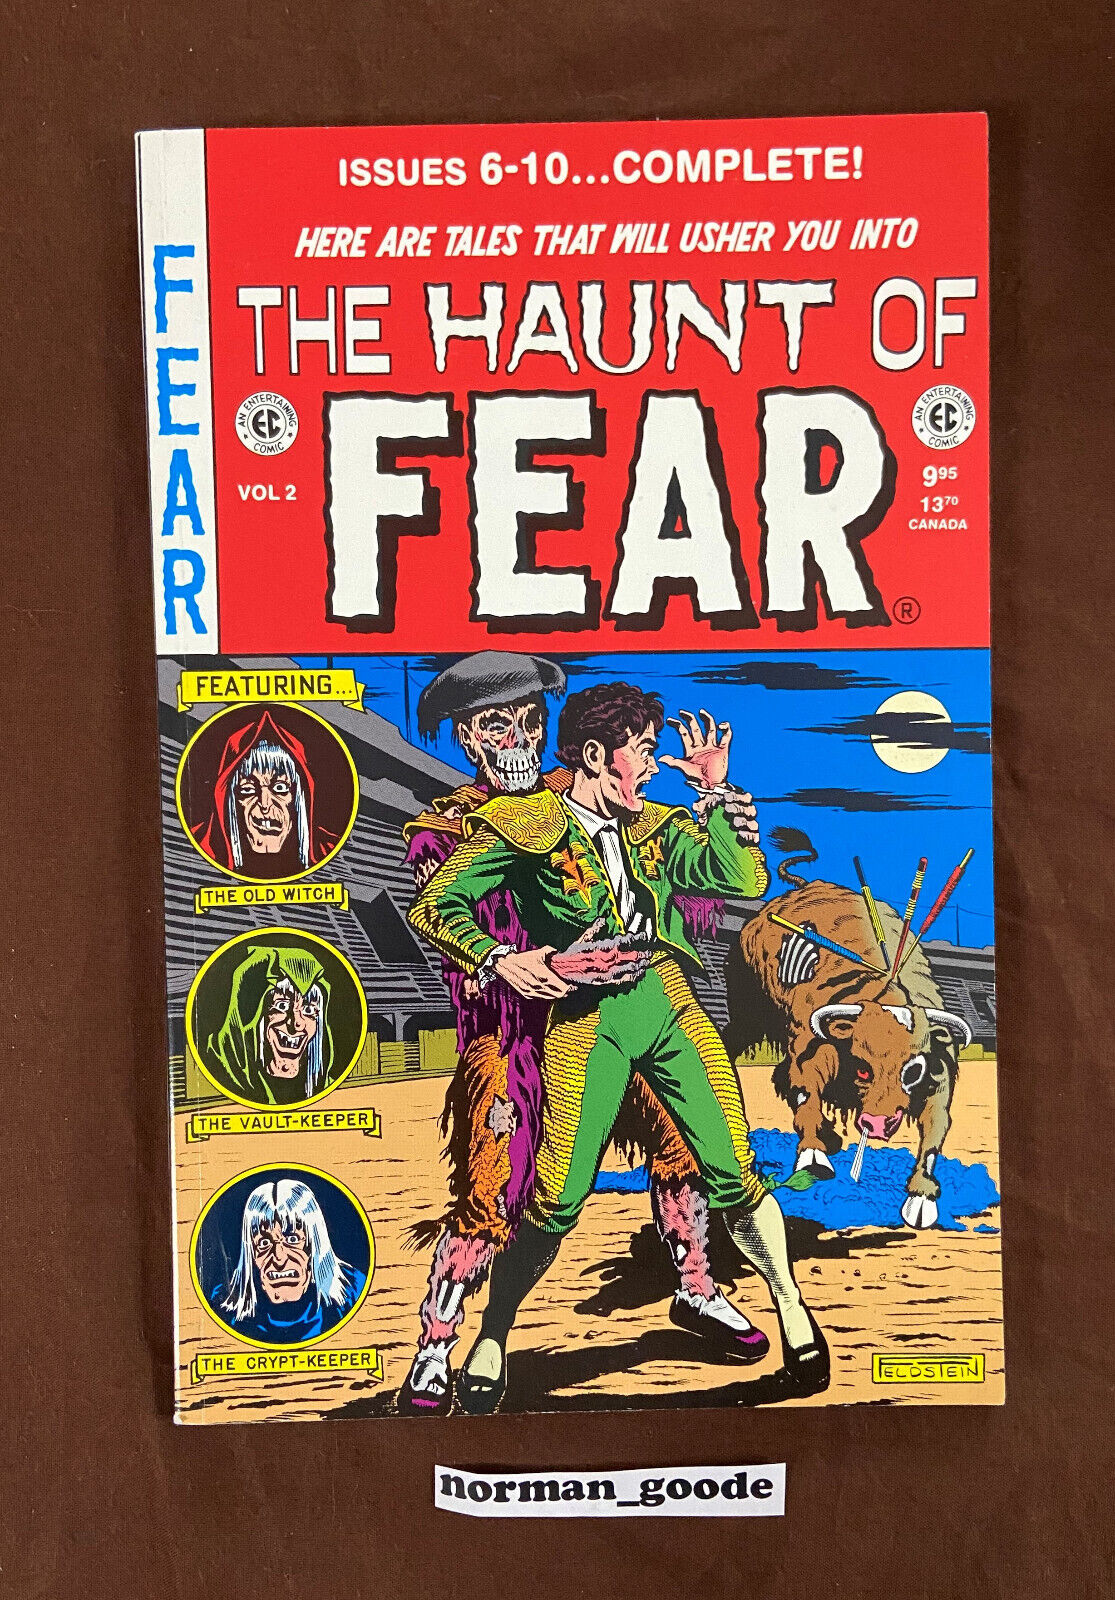 The Haunt of Fear EC Annual 2 *NEW* Trade Paperback